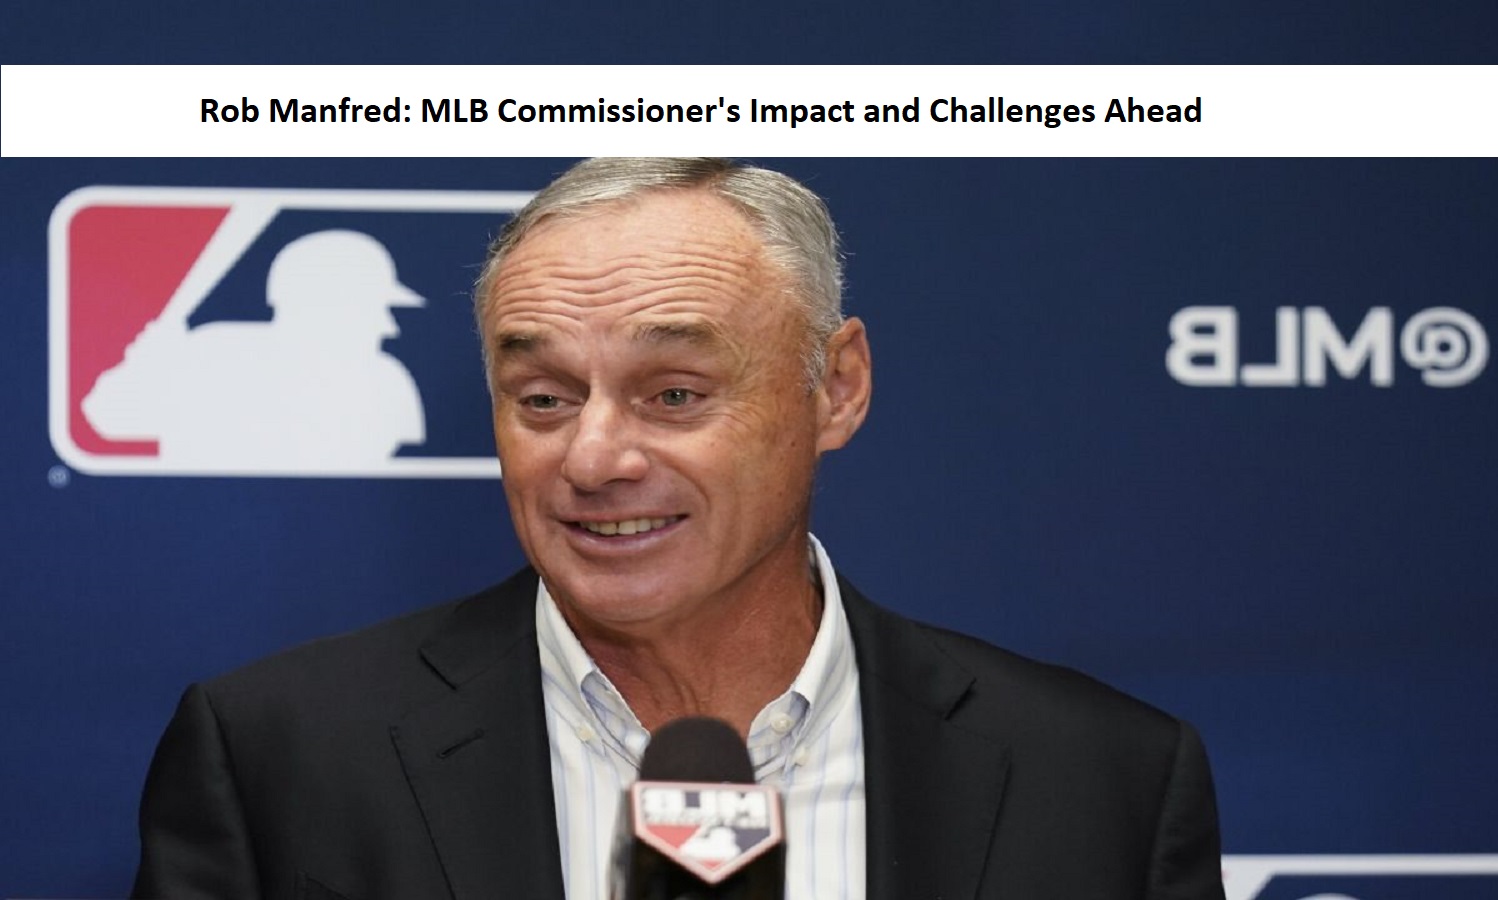 Rob Manfred: MLB Commissioner's Impact and Challenges Ahead